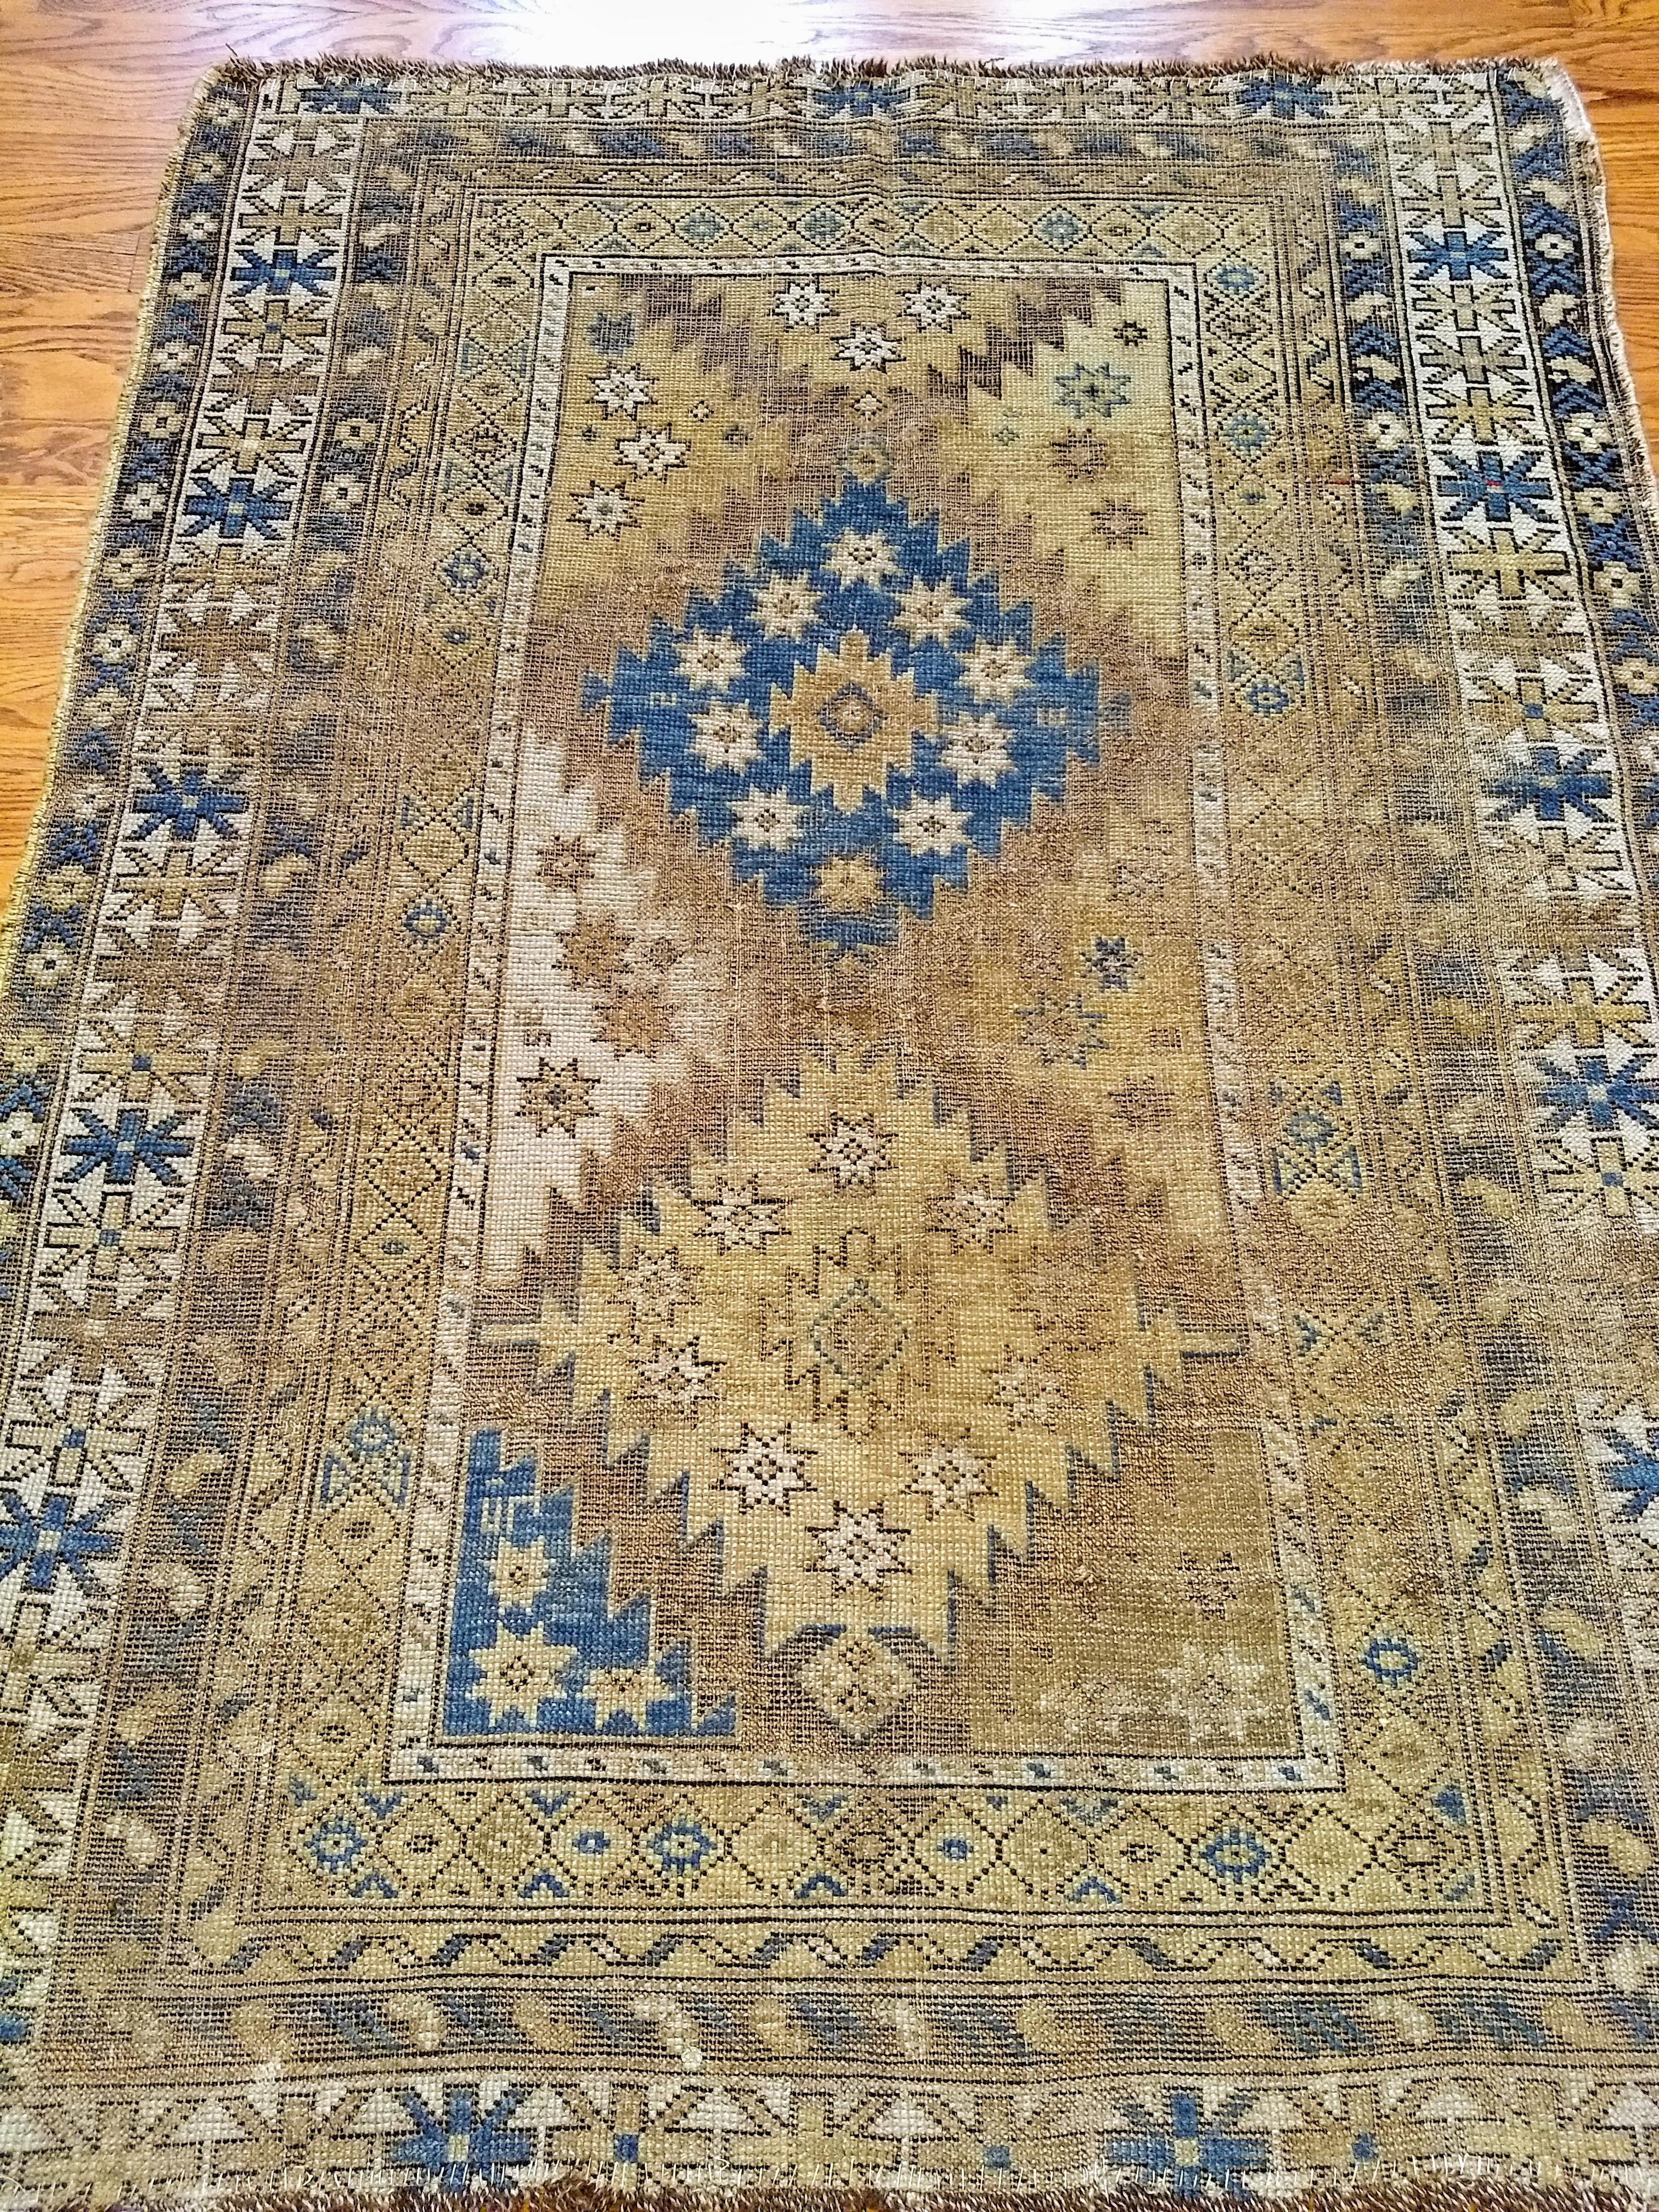 Vegetable Dyed Antique Caucasian Shirvan Area Rug in Pale Blue, Ivory, Camel, Chocolate For Sale